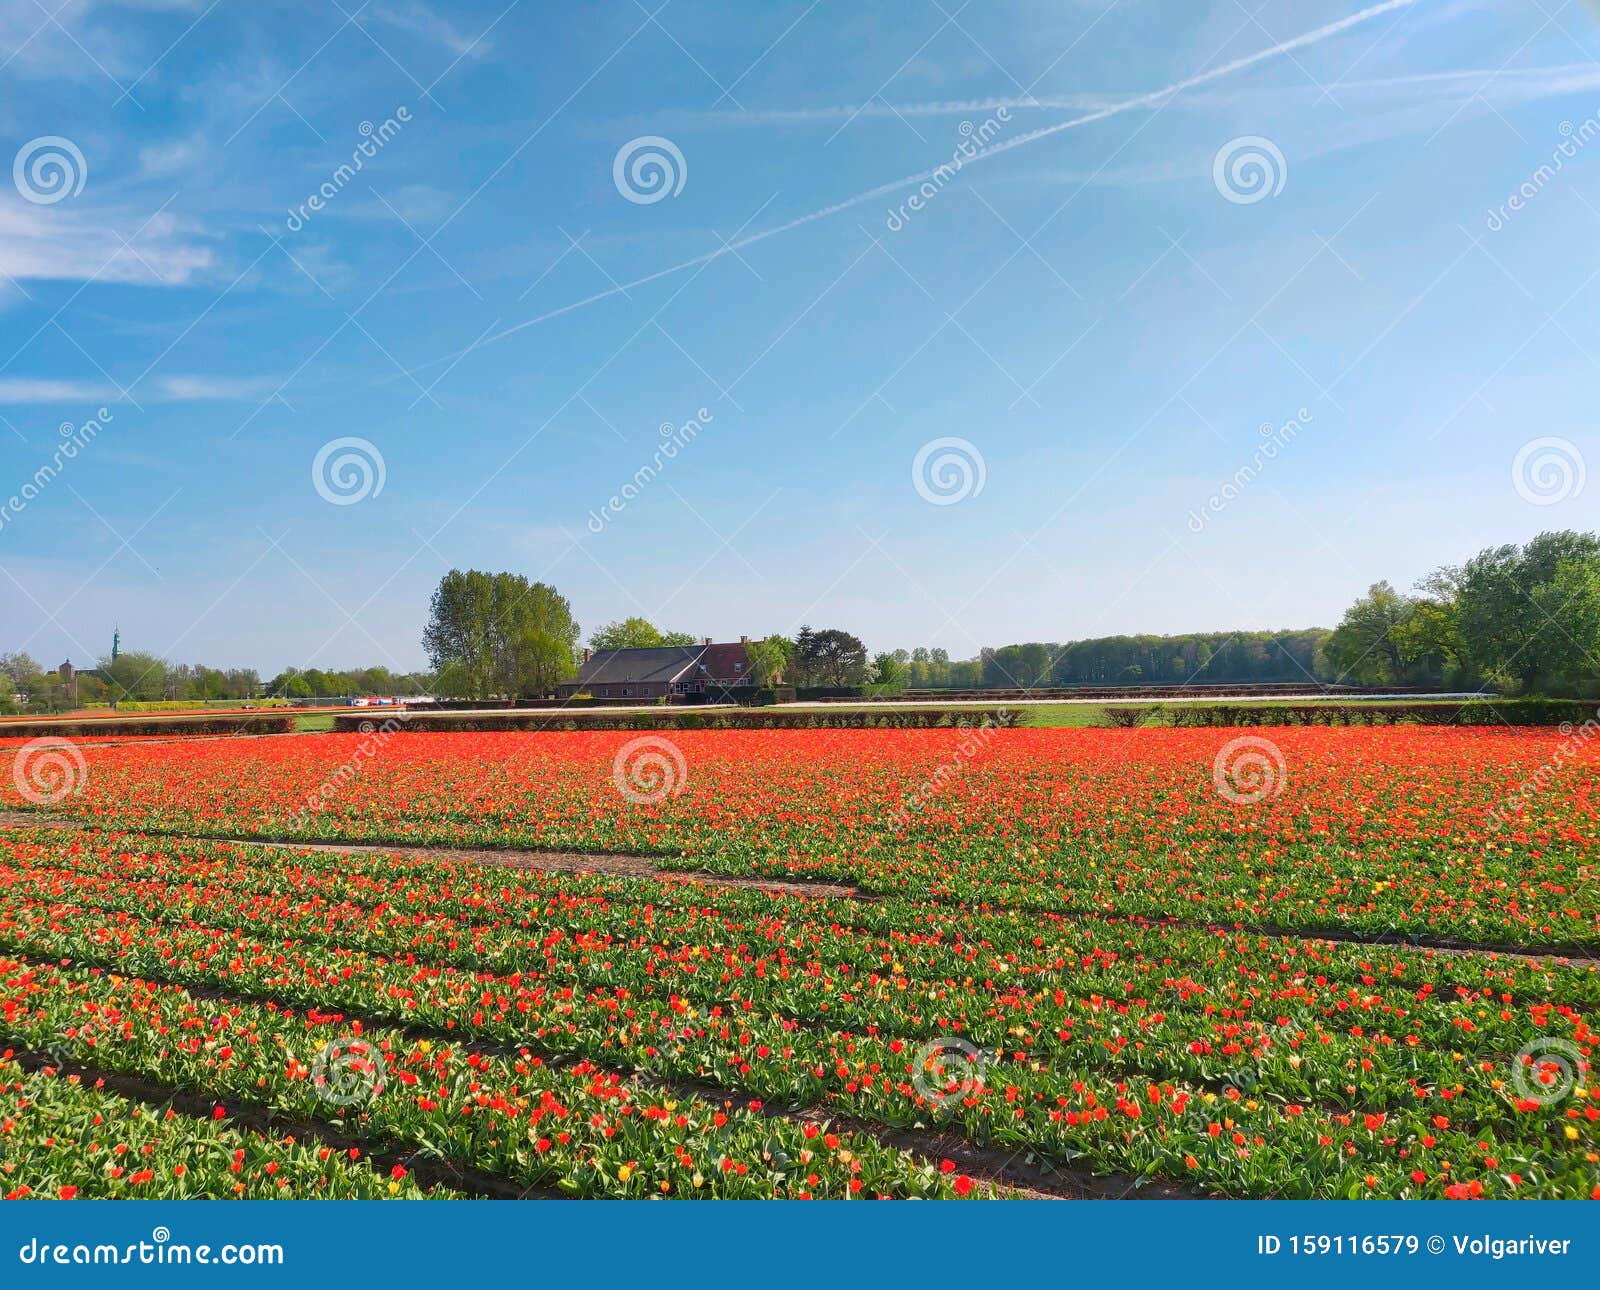 Colorful Tulips Fields in Holland, Spring Season Stock Image - Image of ...